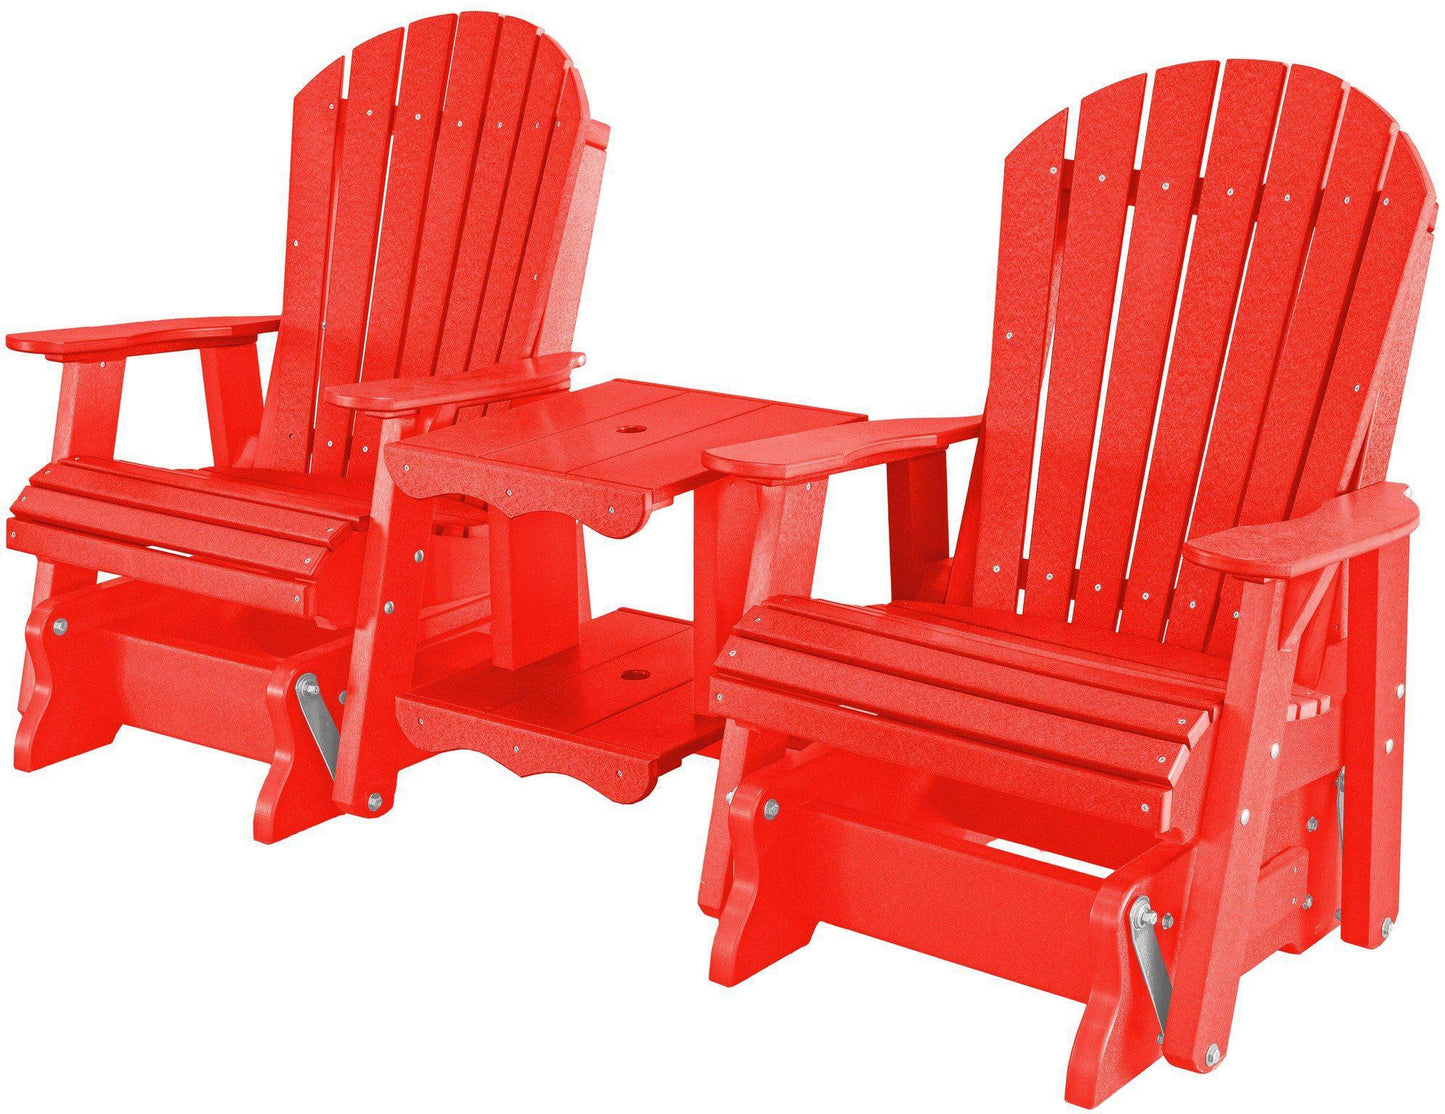 wildridge recycled plastic heritage rock-a-tee double seat adirondack glider bright red